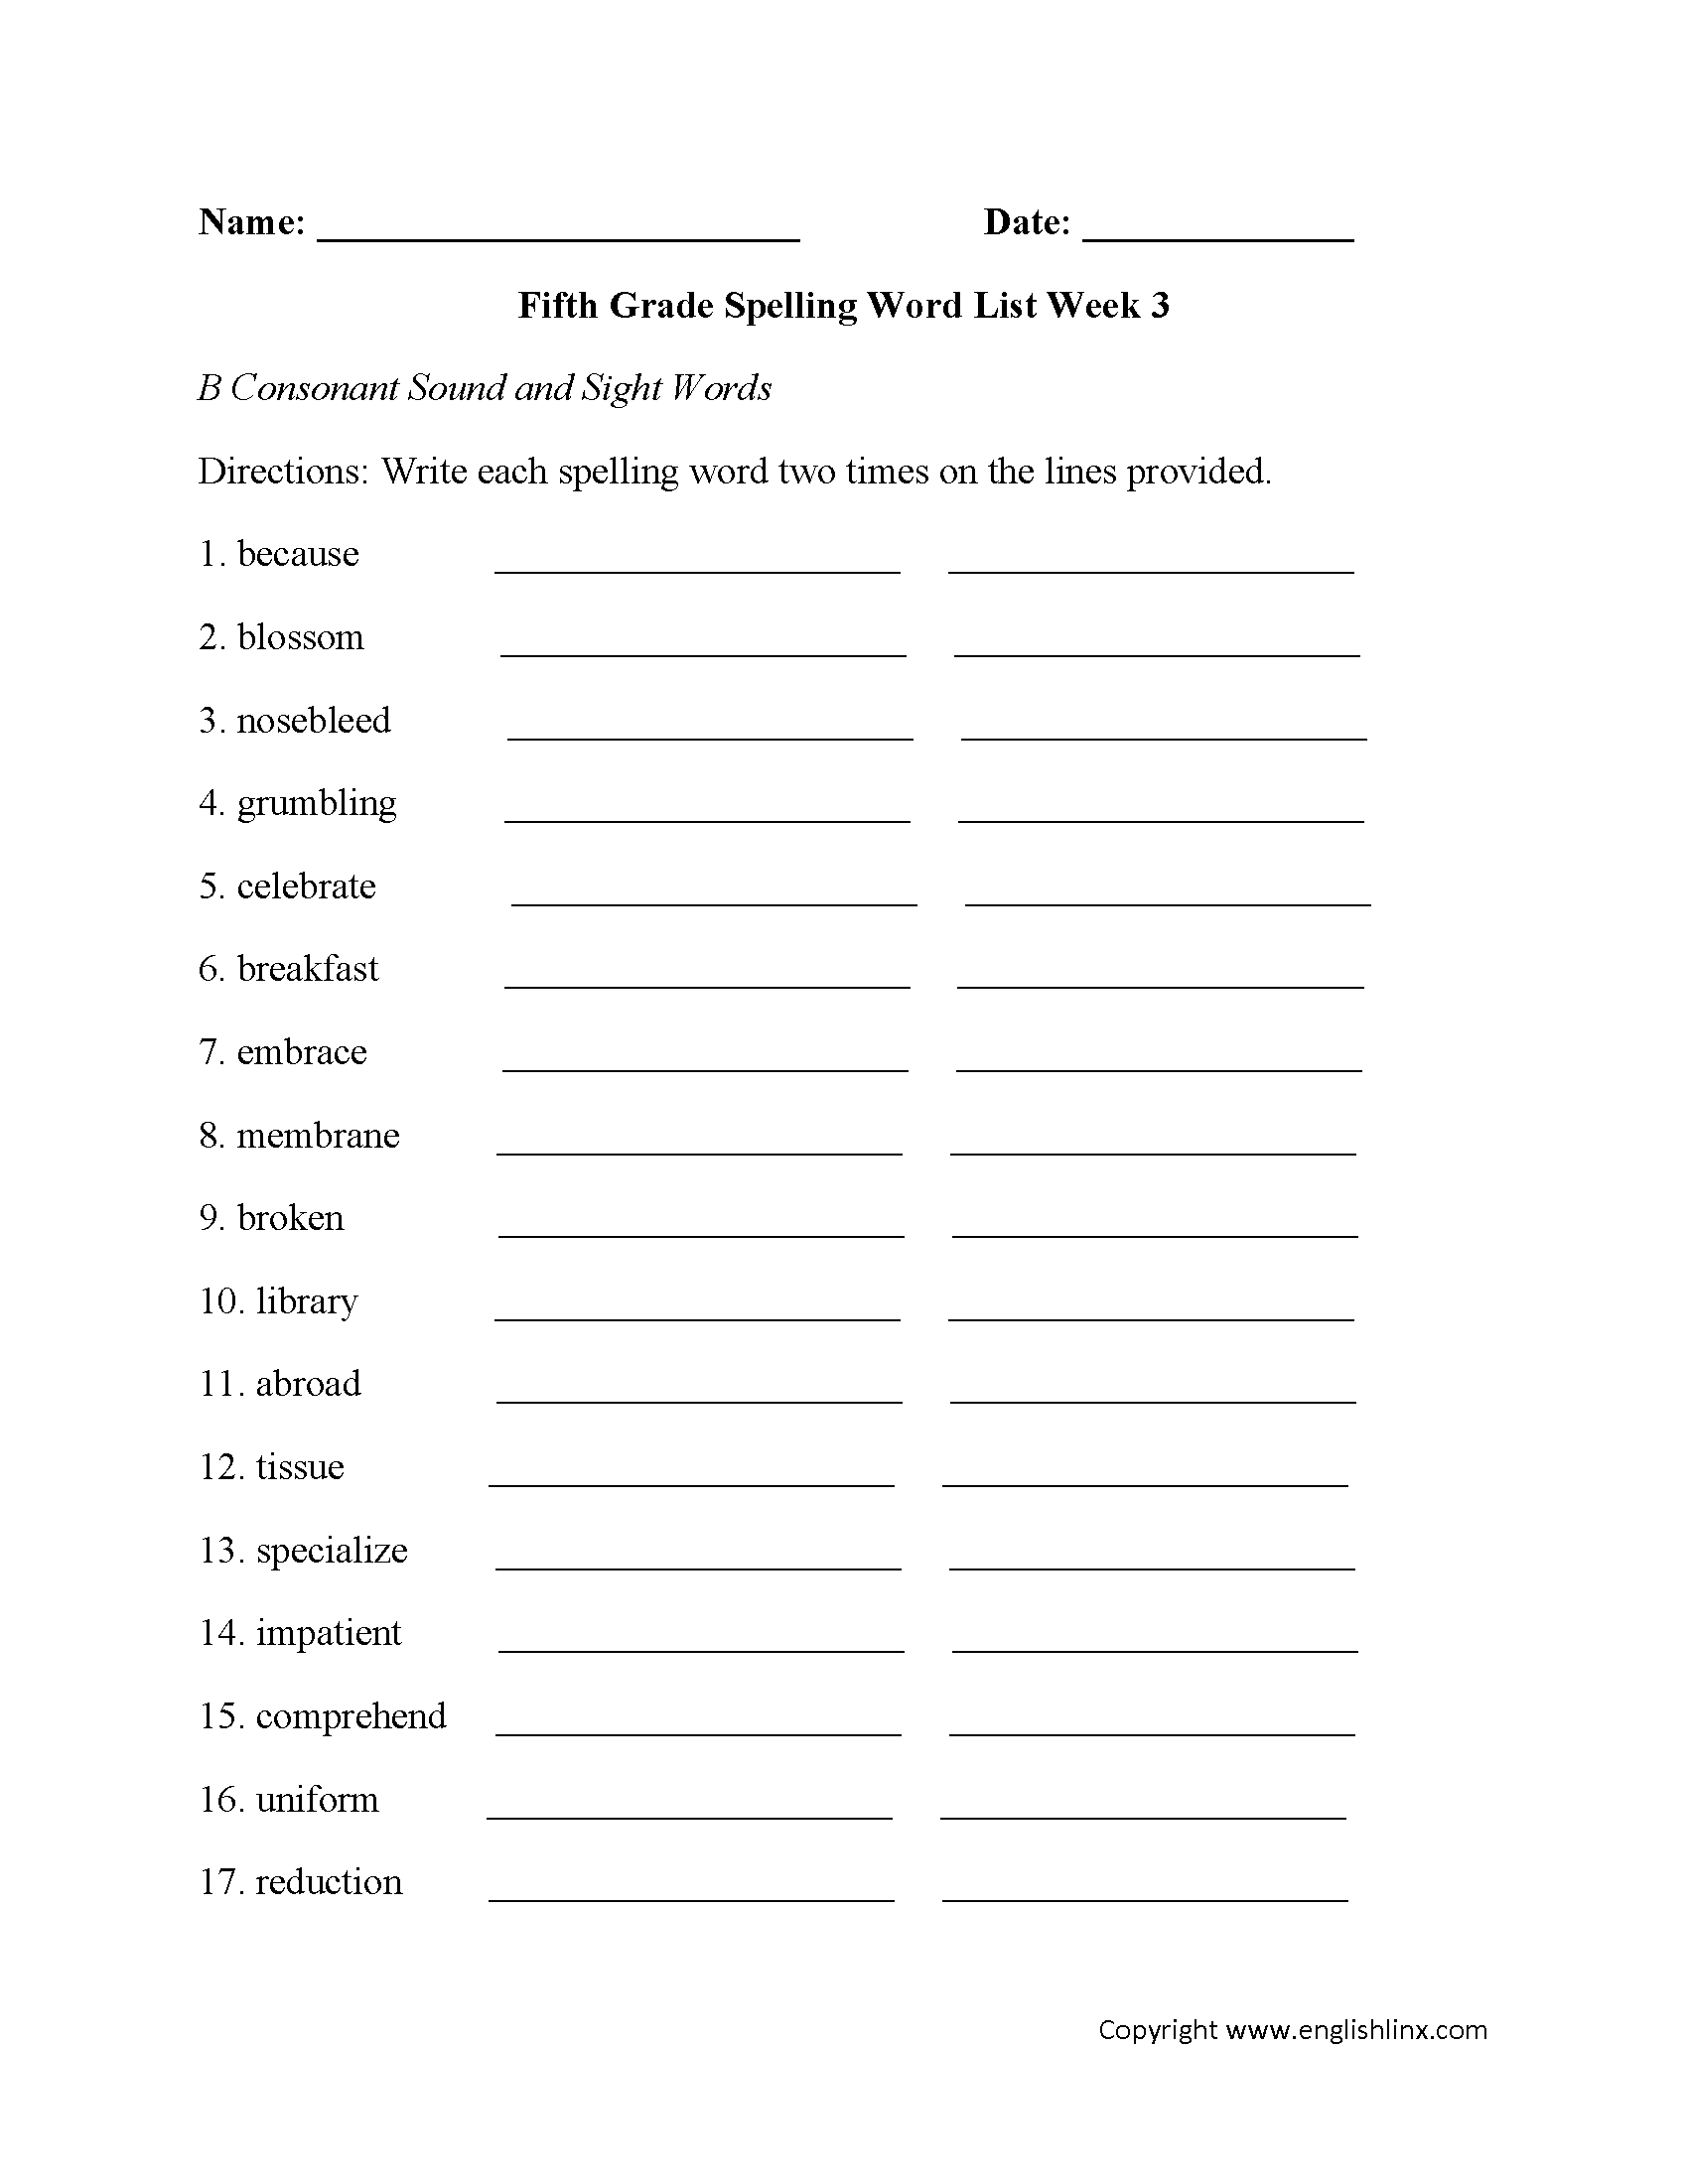 Week 3 B Consonant and Sight Words Fifth Grade Spelling Words Worksheets